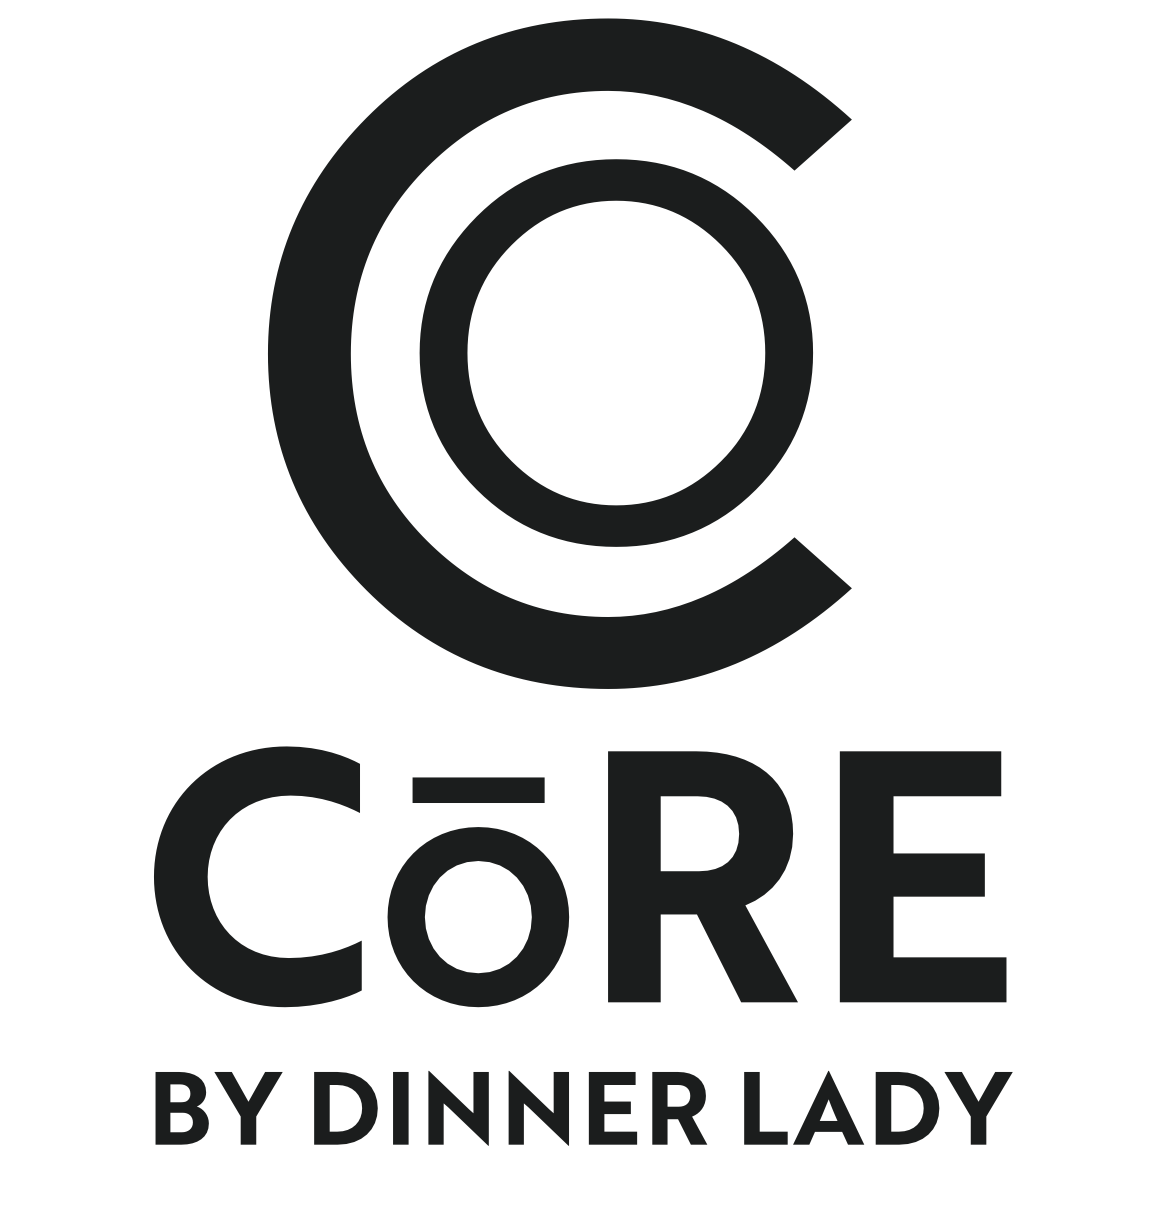 CORE by Dinner Lady